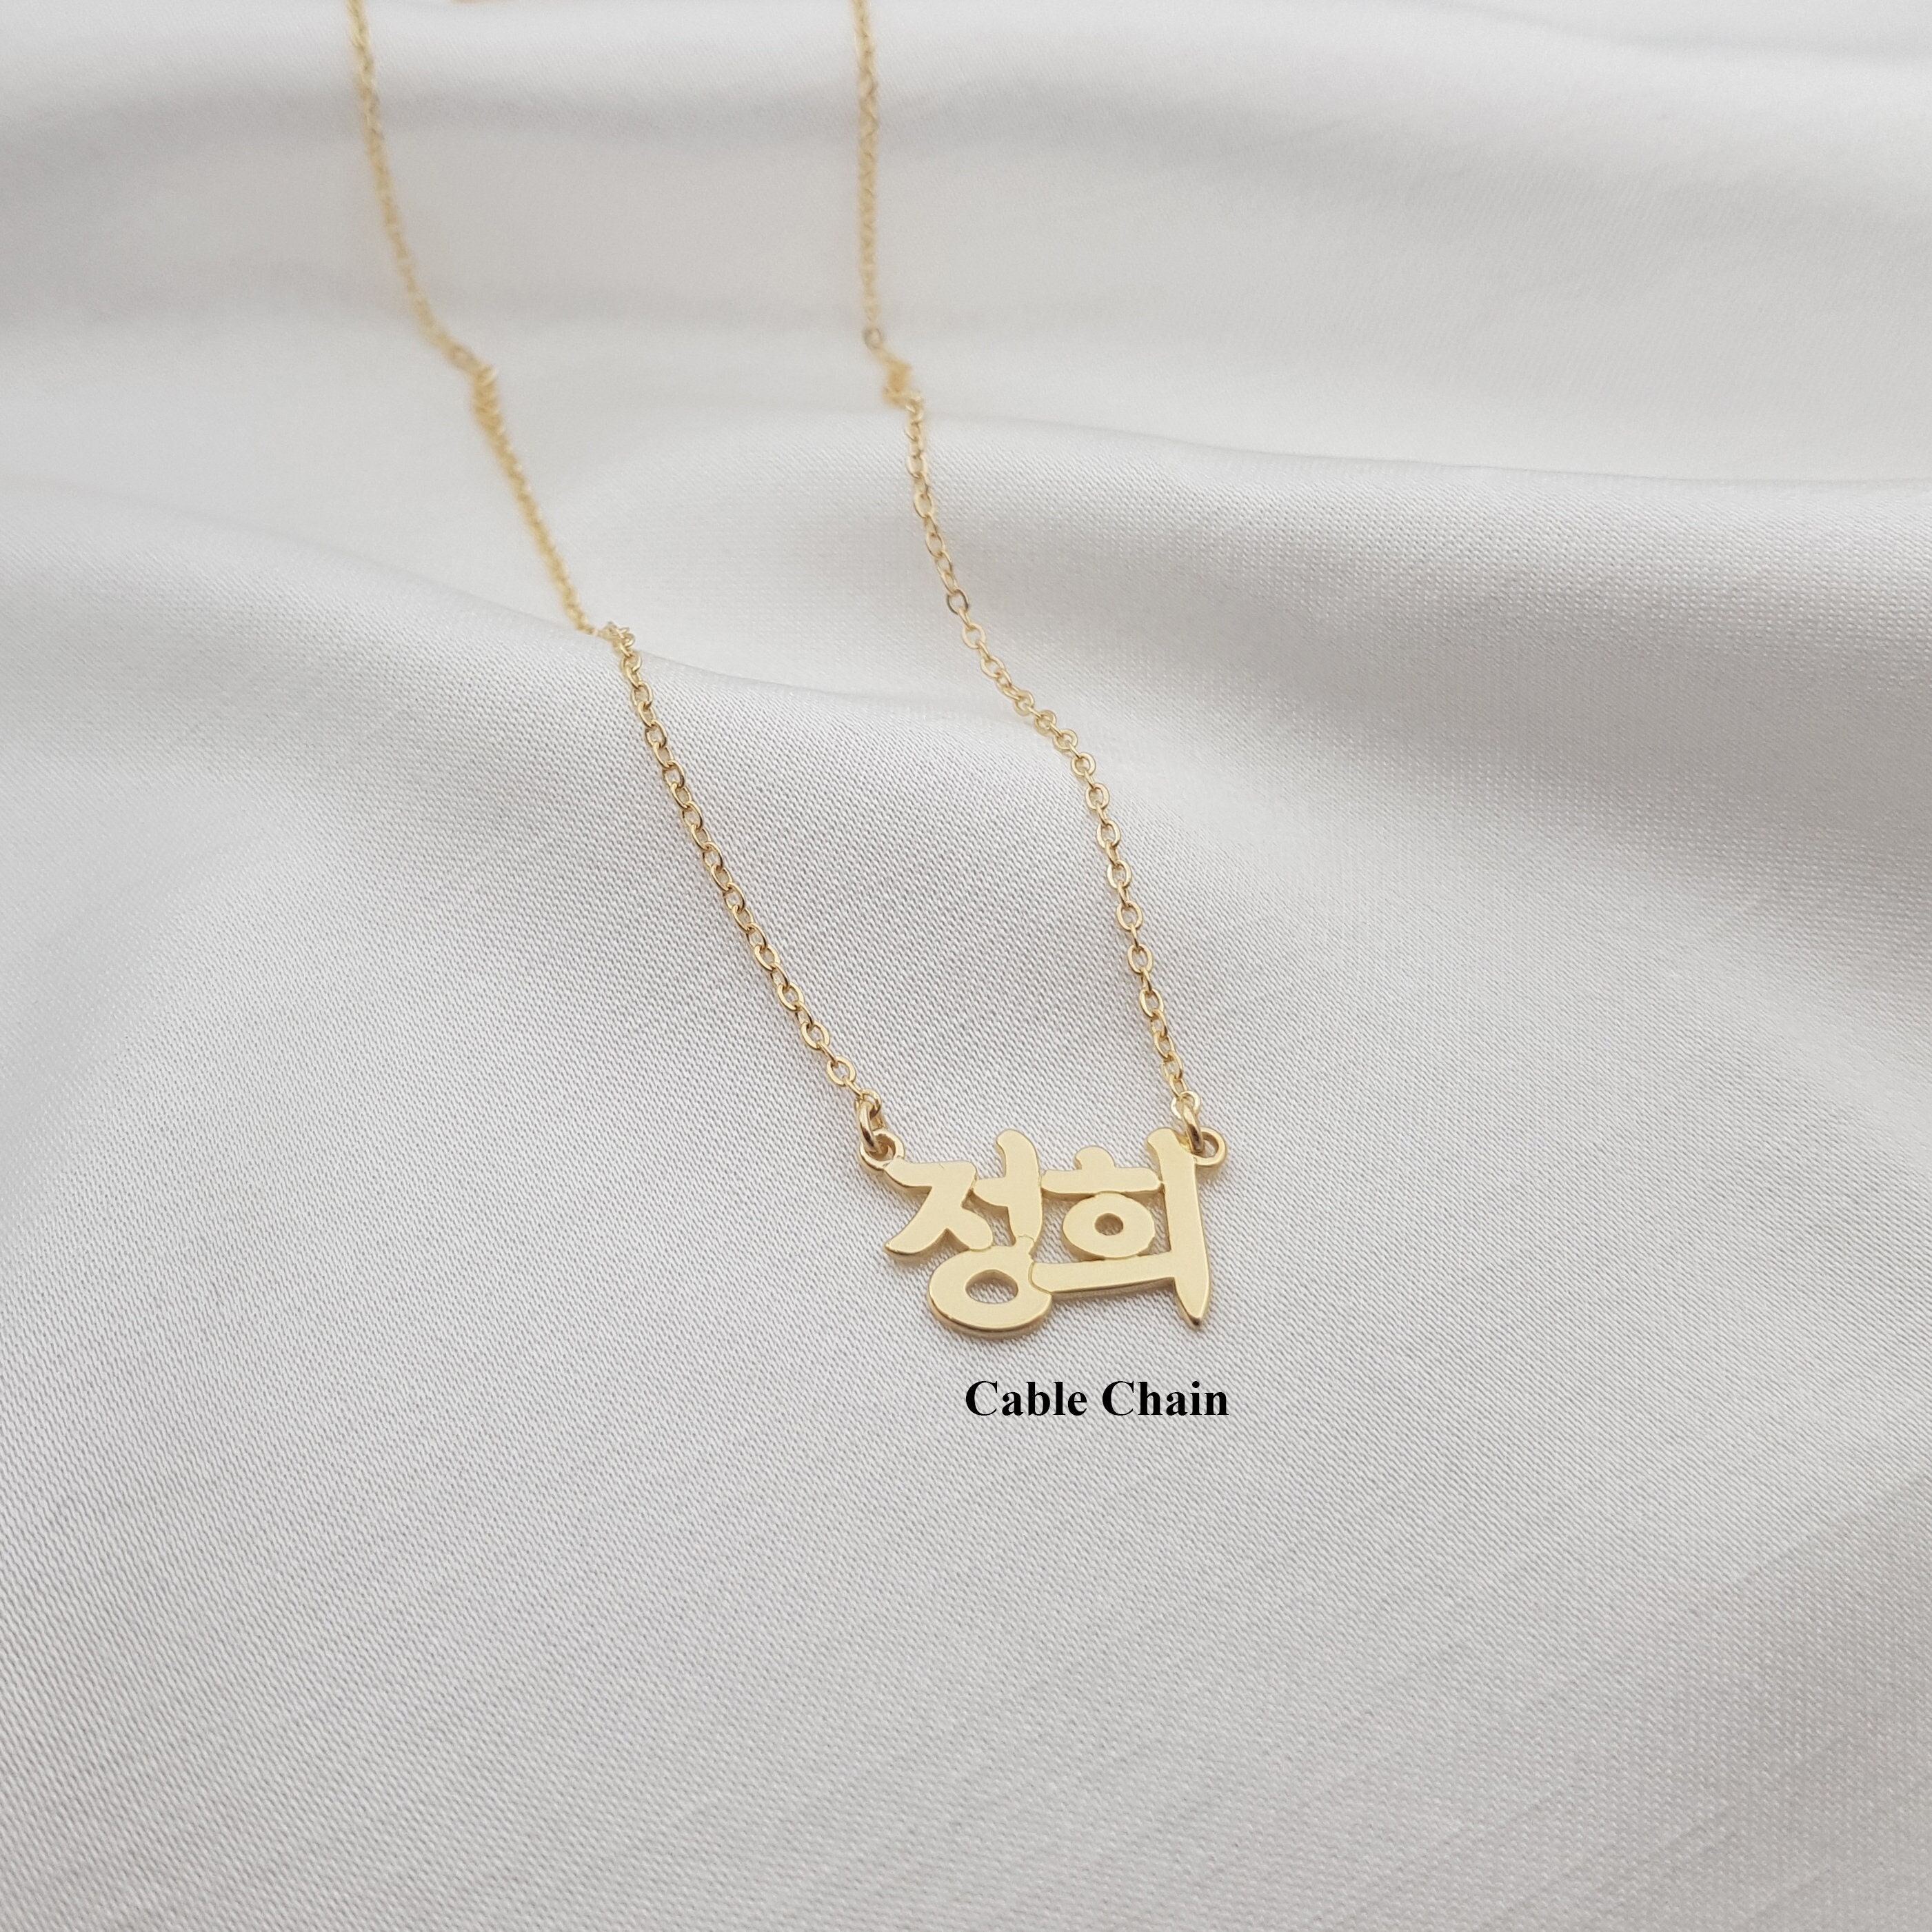 Real Gold Korean Name Necklace / Japanese name necklace in Solid 14k gold |  eBay